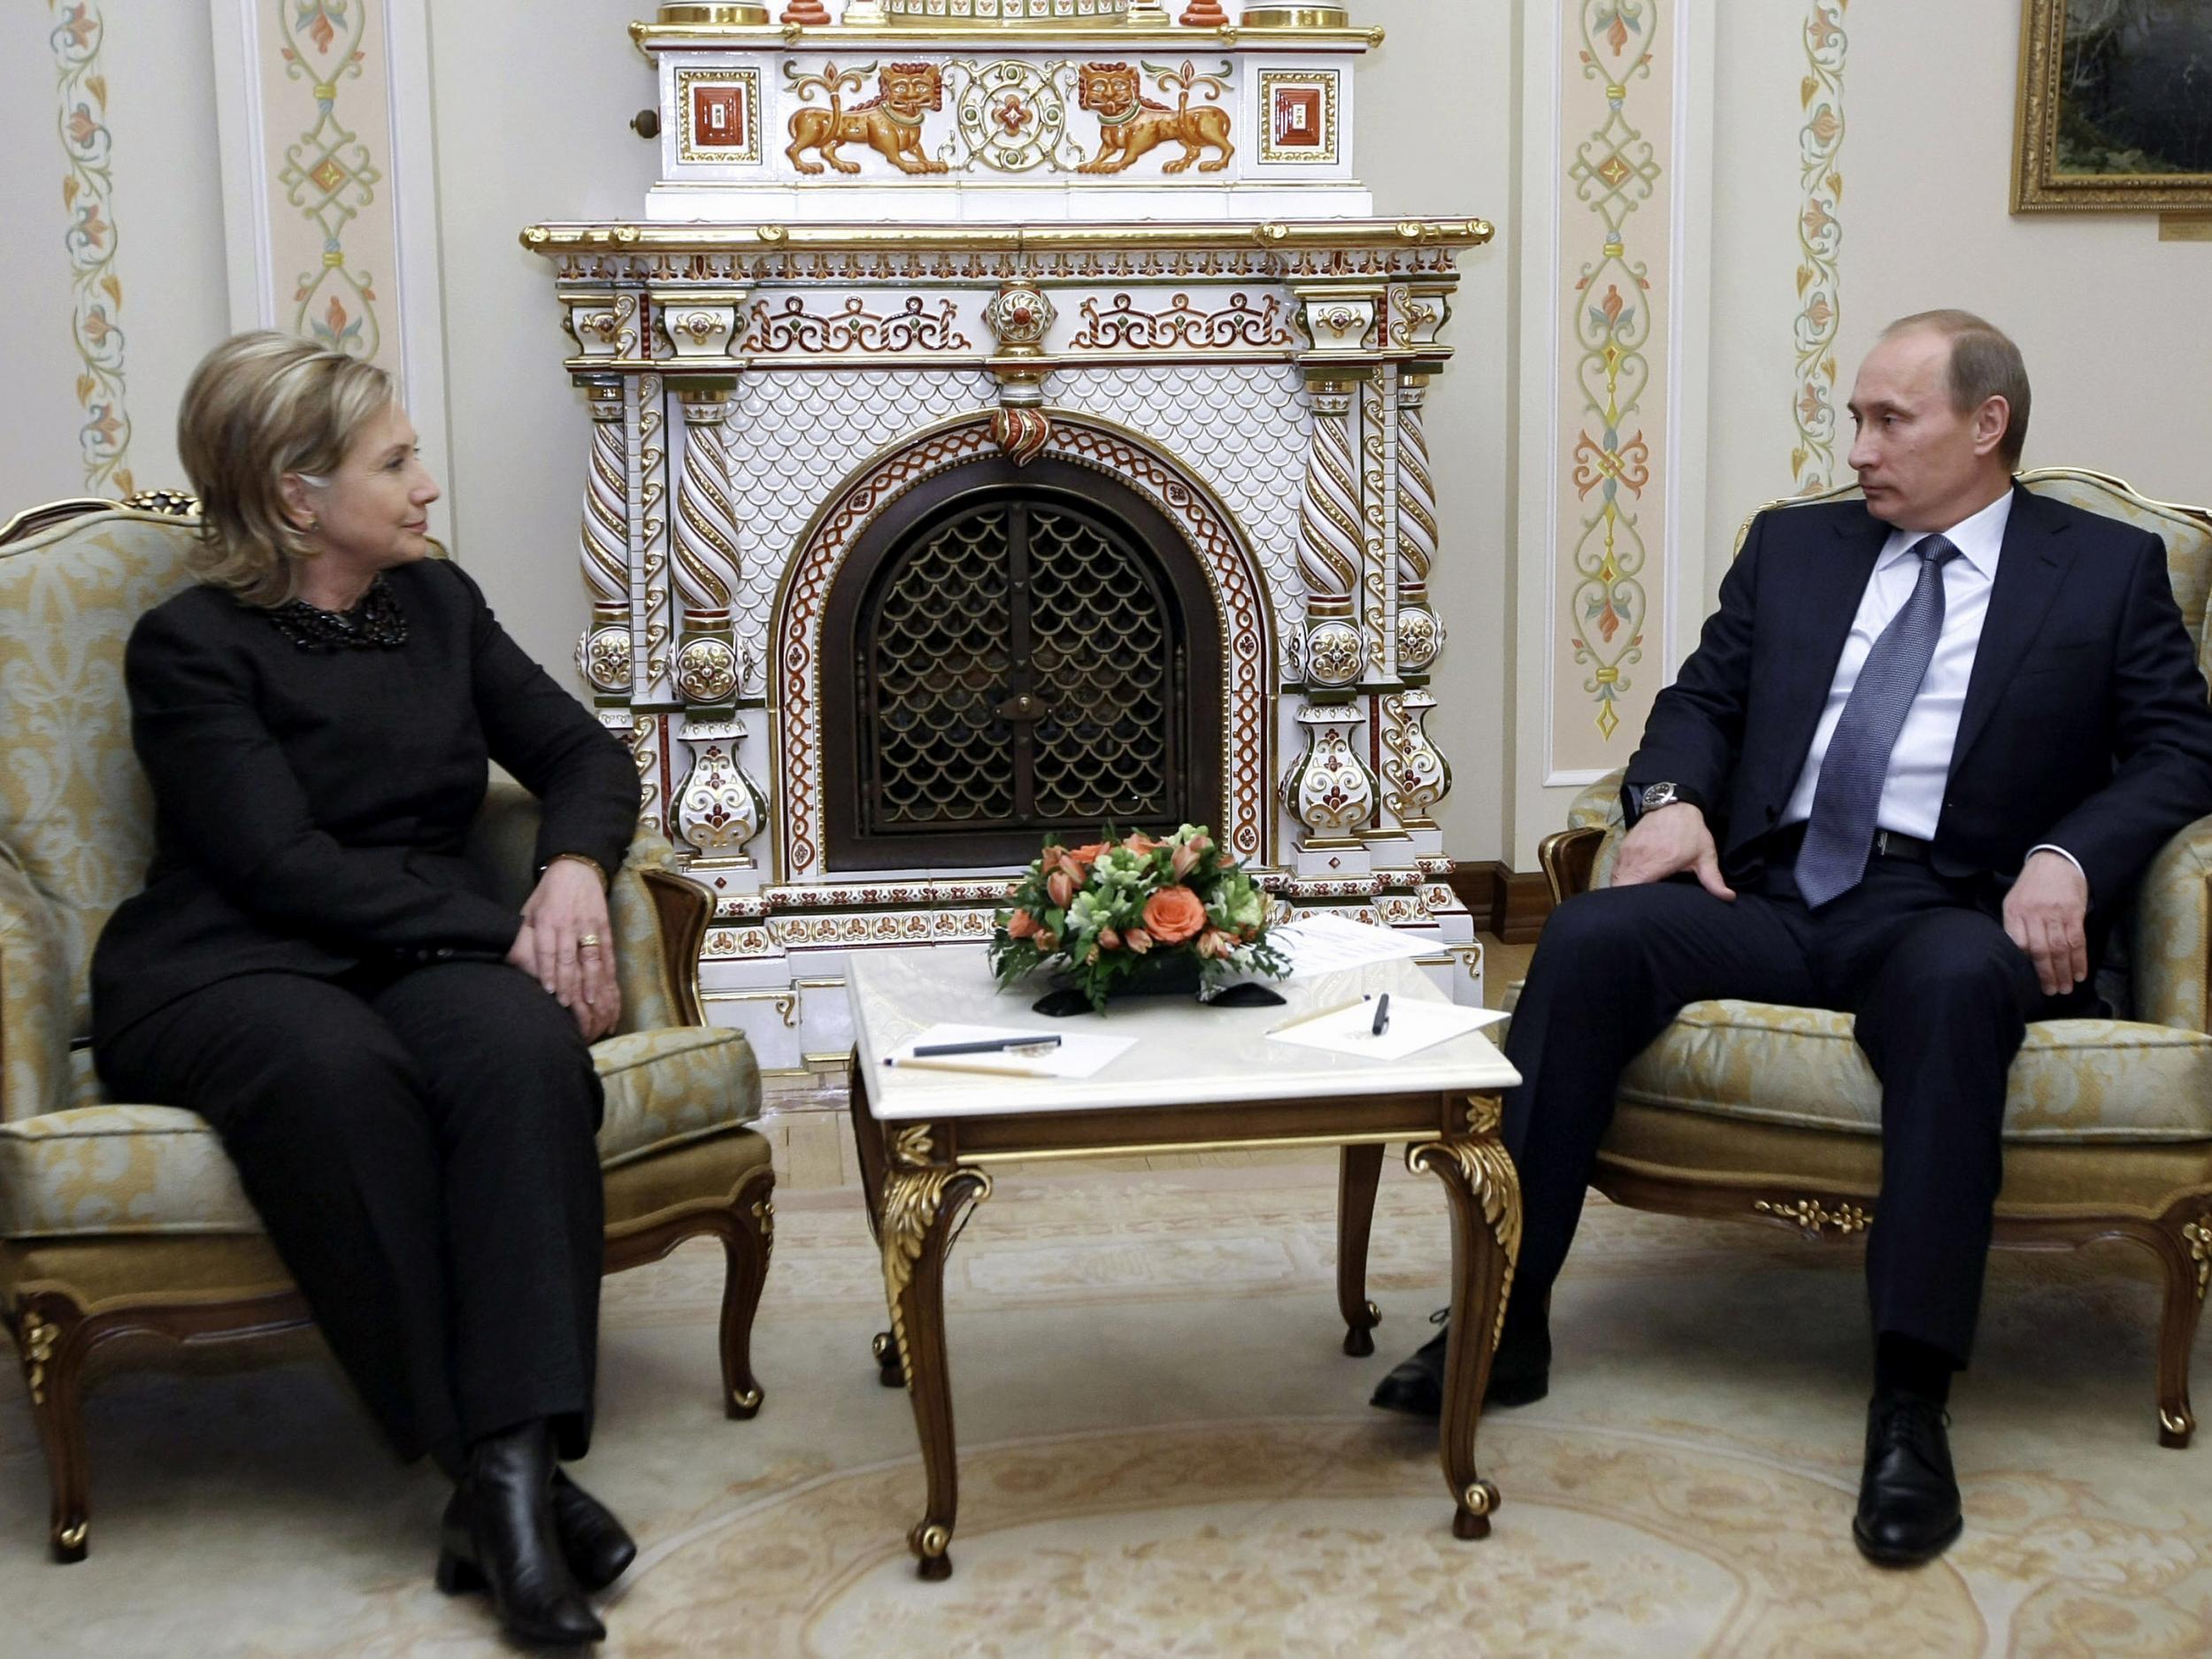 The President elect, in her former role as Secretary of State, meeting with Putin on a visit to Russia in 2010